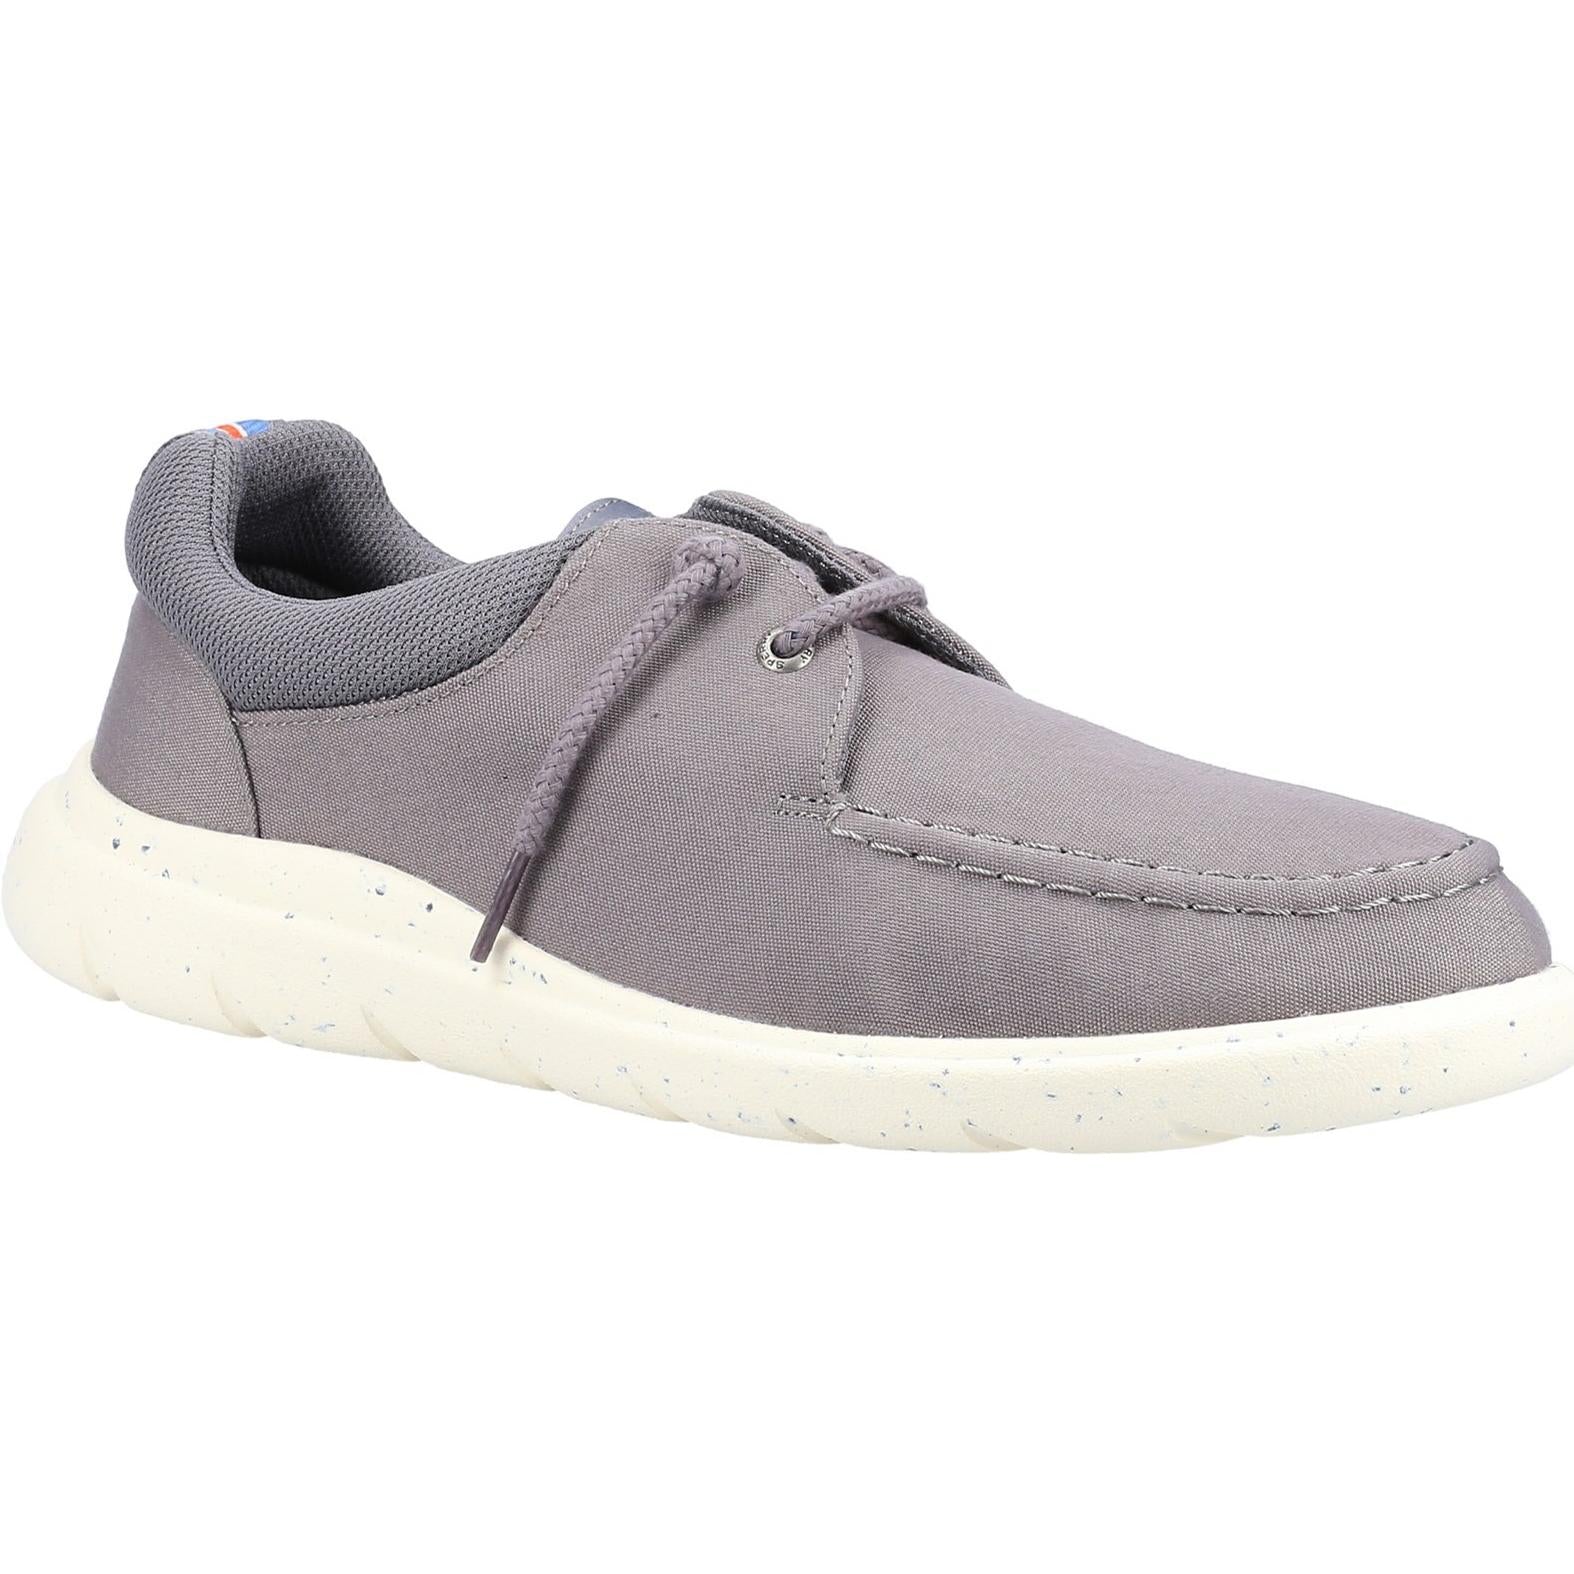 Sperry Top-sider MOC SEACYCLE Casual shoe